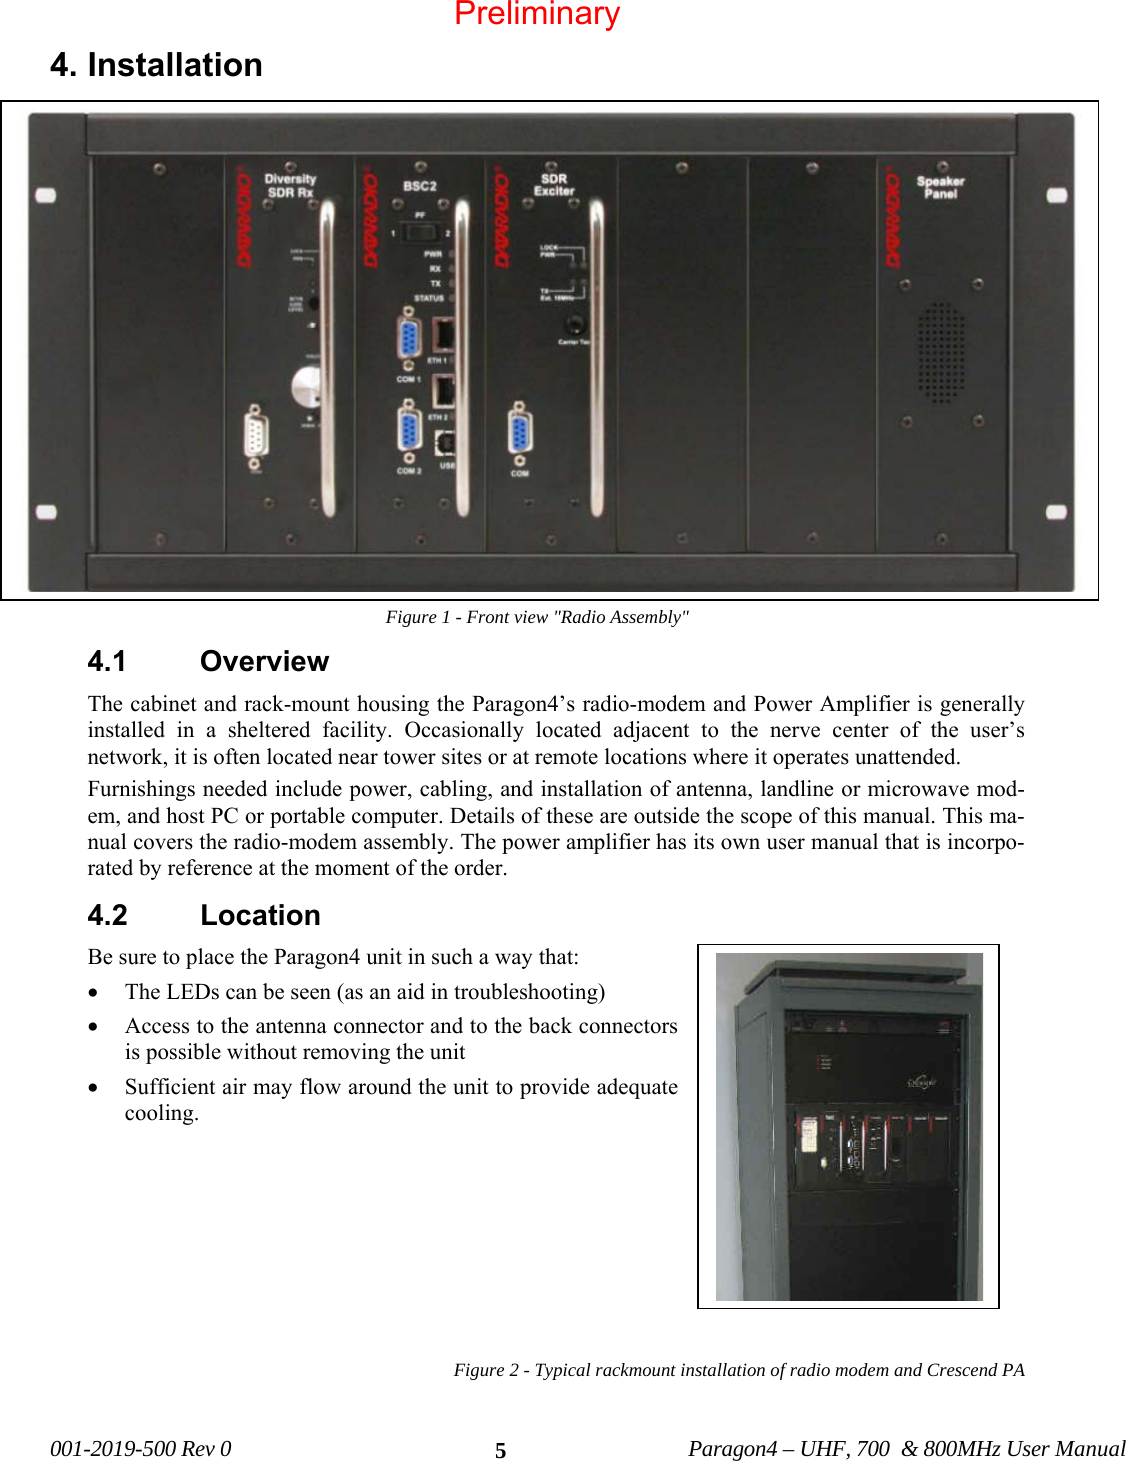   001-2019-500 Rev 0          Paragon4 – UHF, 700  &amp; 800MHz User Manual   54. Installation Figure 1 - Front view &quot;Radio Assembly&quot; 4.1 Overview The cabinet and rack-mount housing the Paragon4’s radio-modem and Power Amplifier is generally installed in a sheltered facility. Occasionally located adjacent to the nerve center of the user’s network, it is often located near tower sites or at remote locations where it operates unattended. Furnishings needed include power, cabling, and installation of antenna, landline or microwave mod-em, and host PC or portable computer. Details of these are outside the scope of this manual. This ma-nual covers the radio-modem assembly. The power amplifier has its own user manual that is incorpo-rated by reference at the moment of the order. 4.2 Location Be sure to place the Paragon4 unit in such a way that: • The LEDs can be seen (as an aid in troubleshooting) • Access to the antenna connector and to the back connectors is possible without removing the unit  • Sufficient air may flow around the unit to provide adequate cooling.         Figure 2 - Typical rackmount installation of radio modem and Crescend PA   Preliminary